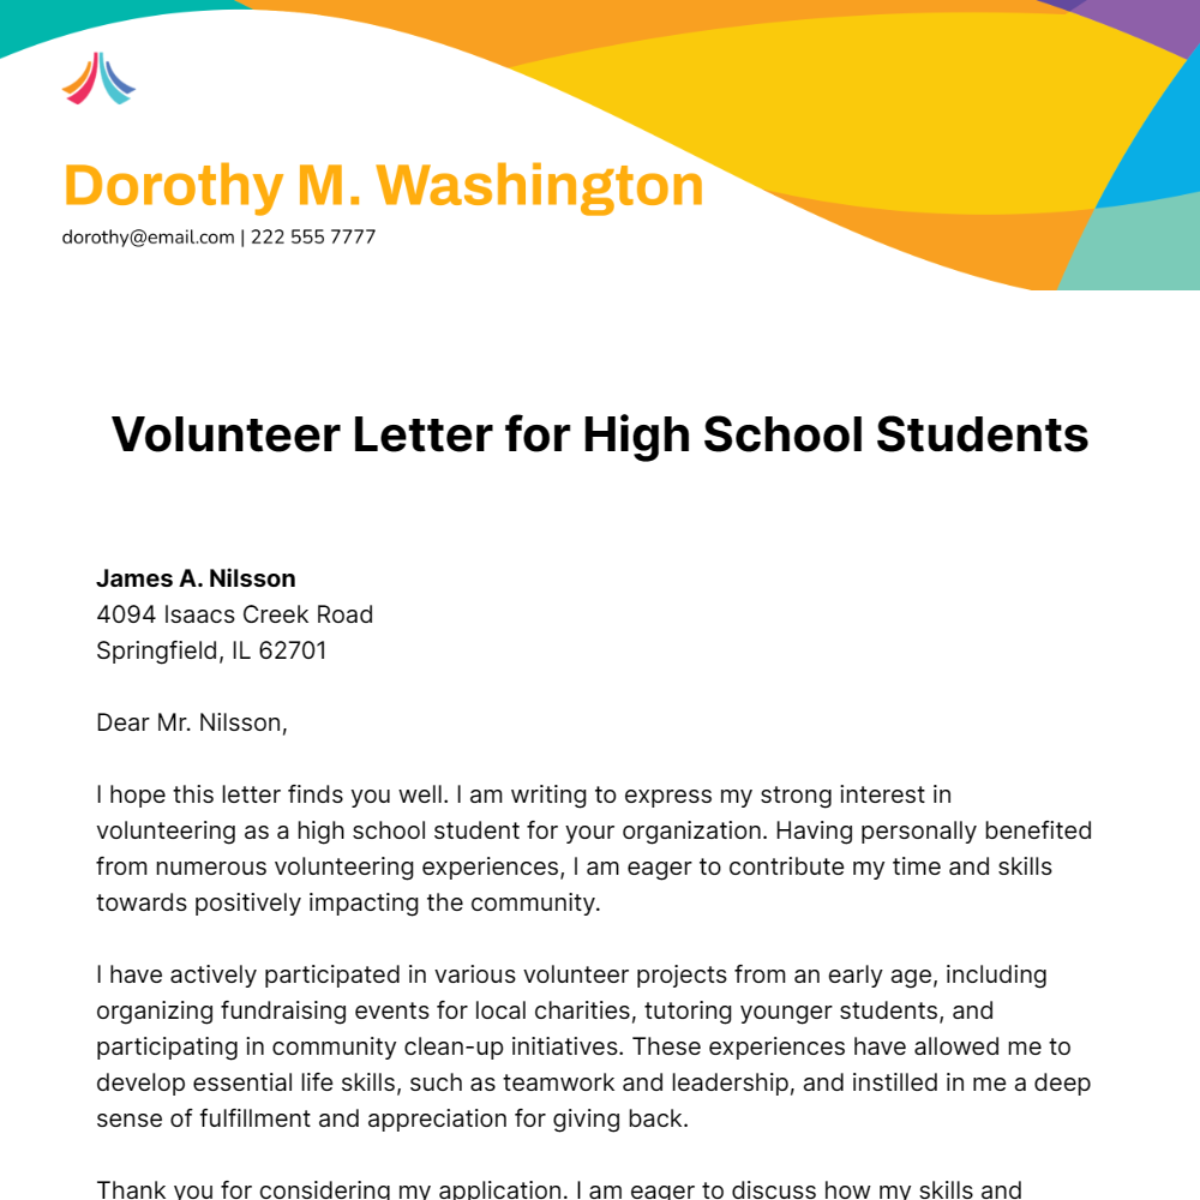 Volunteer Letter for High School Students Template